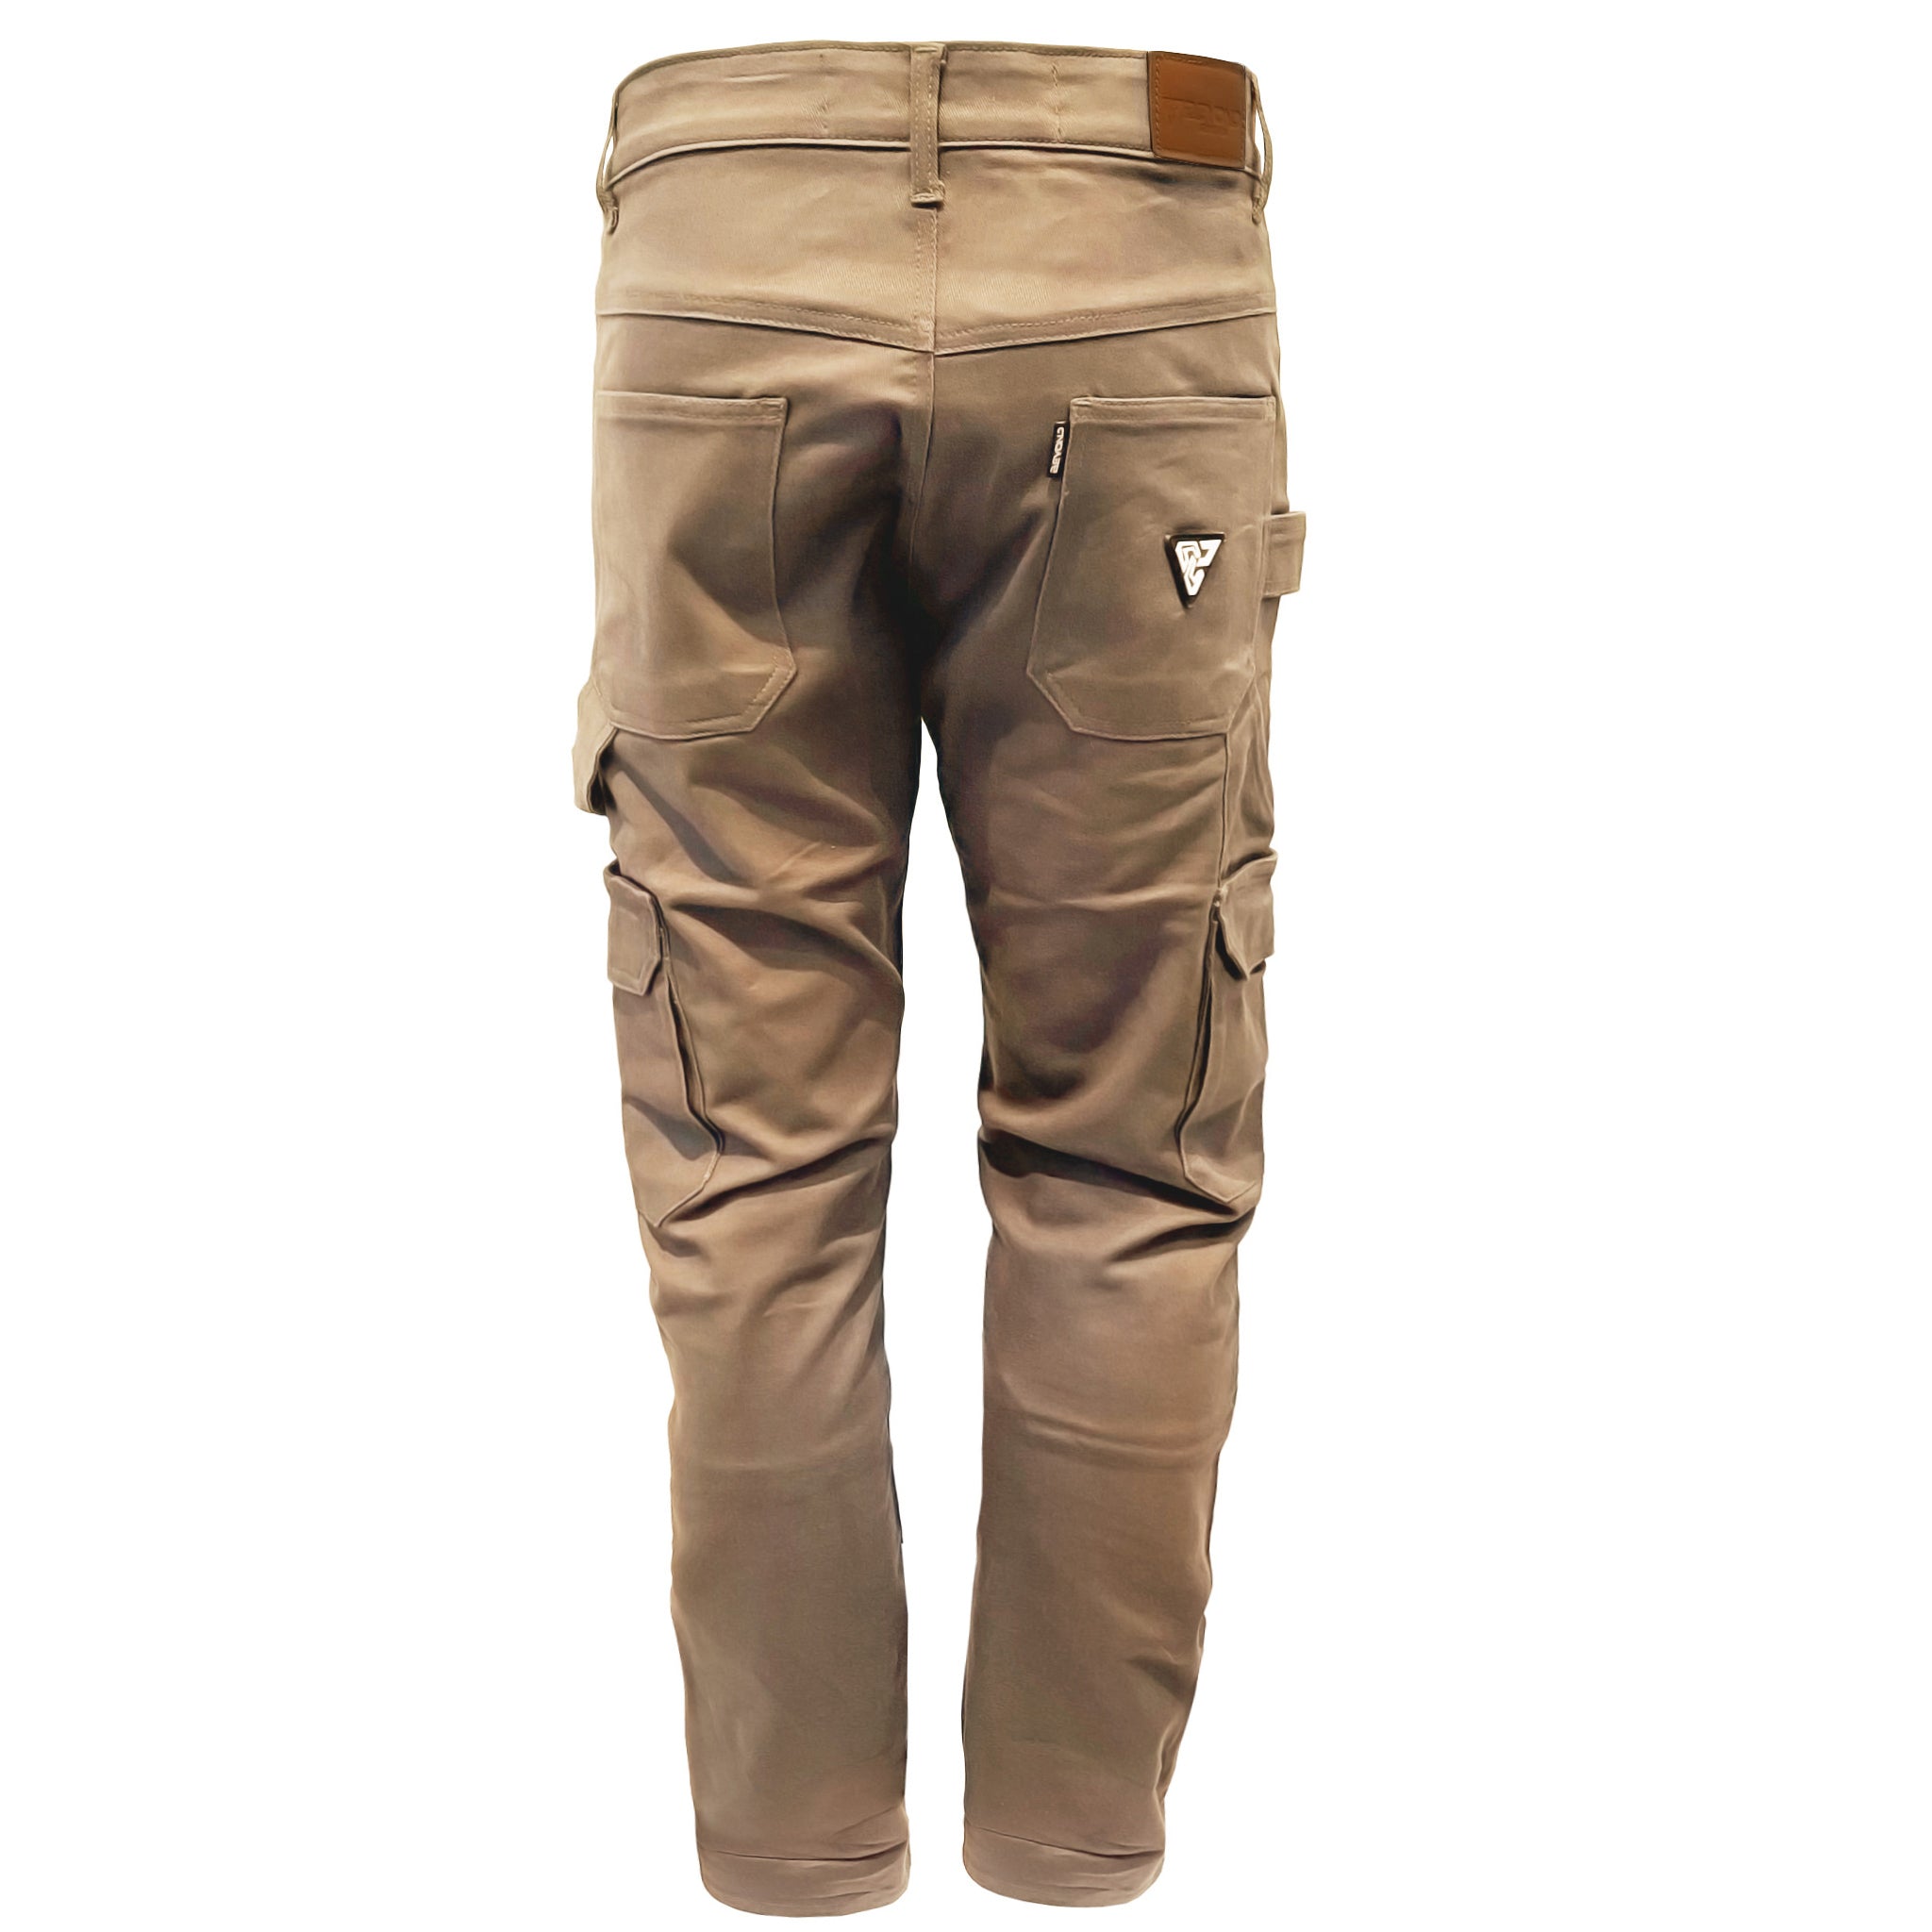 Relaxed Fit Cargo Pants - Khaki Solid with Pads